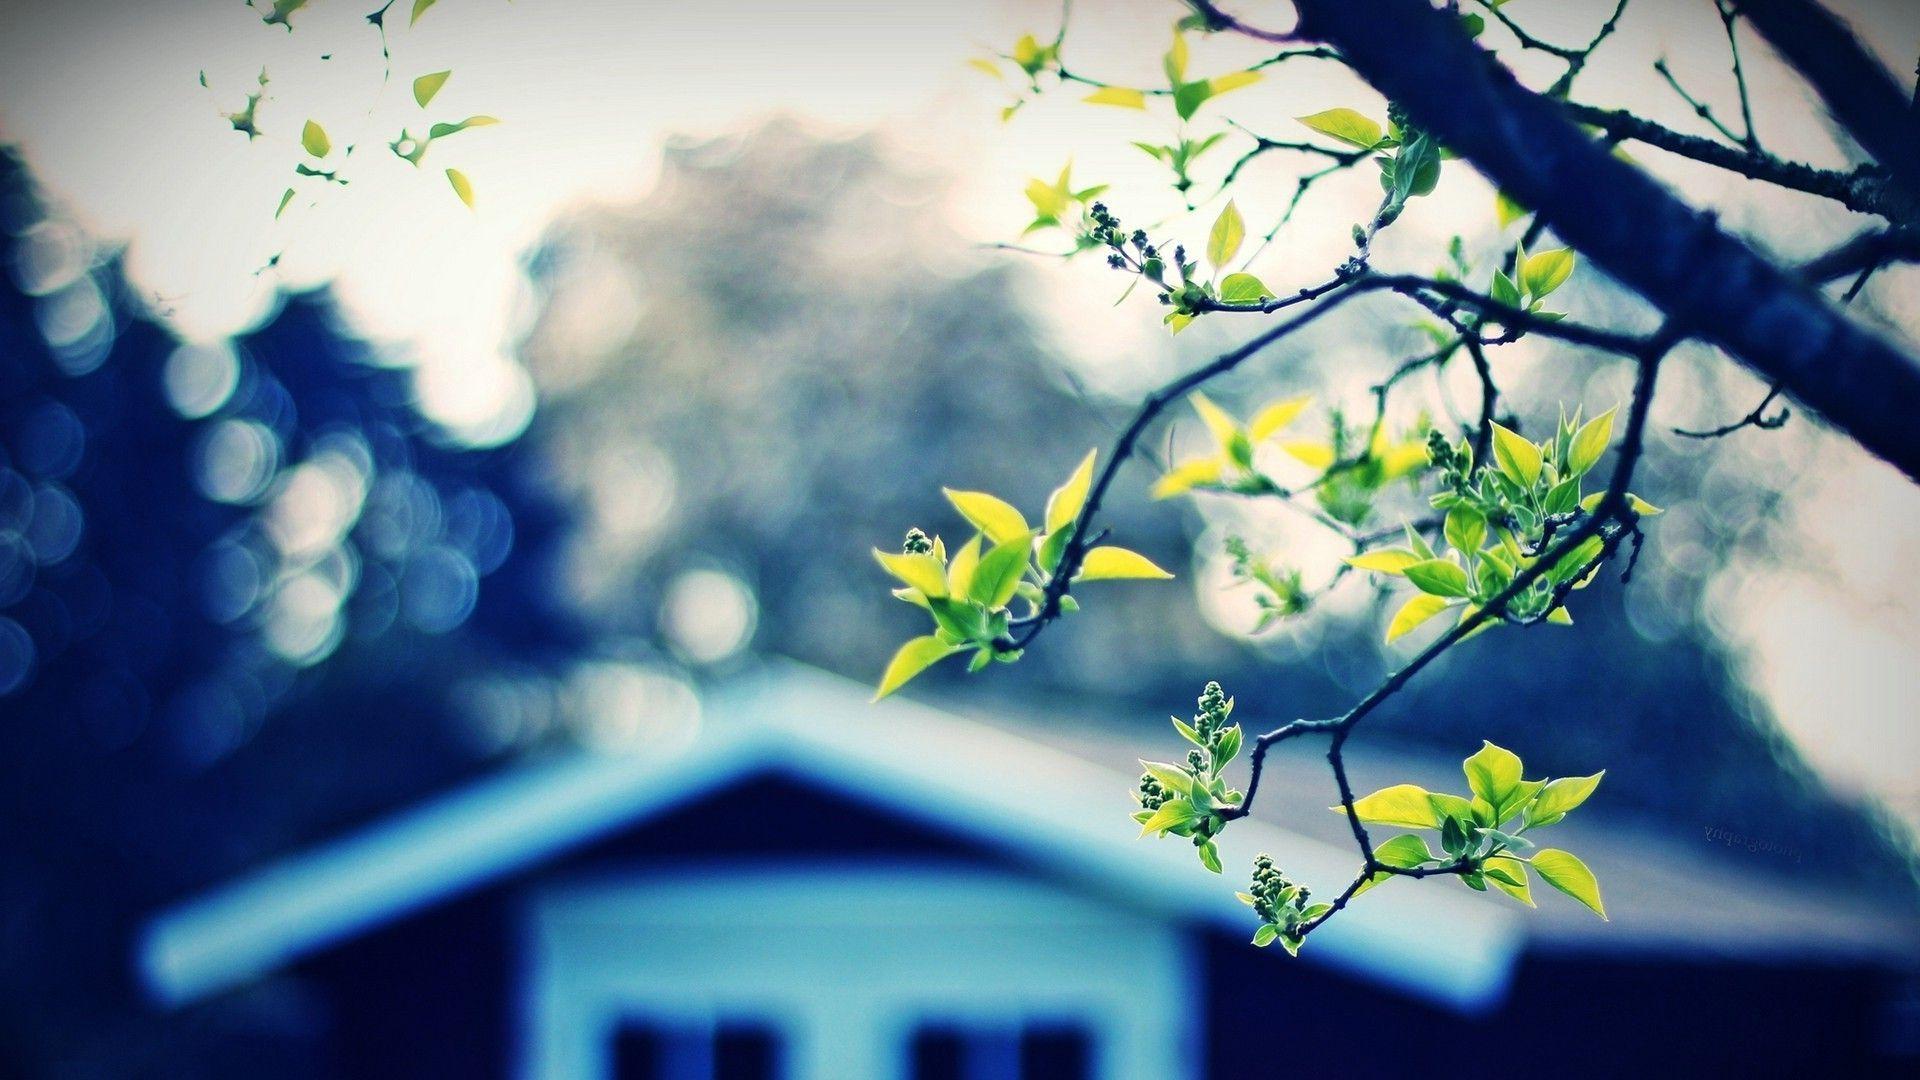 Tree and House HD 1080p Wallpaper Download. vino